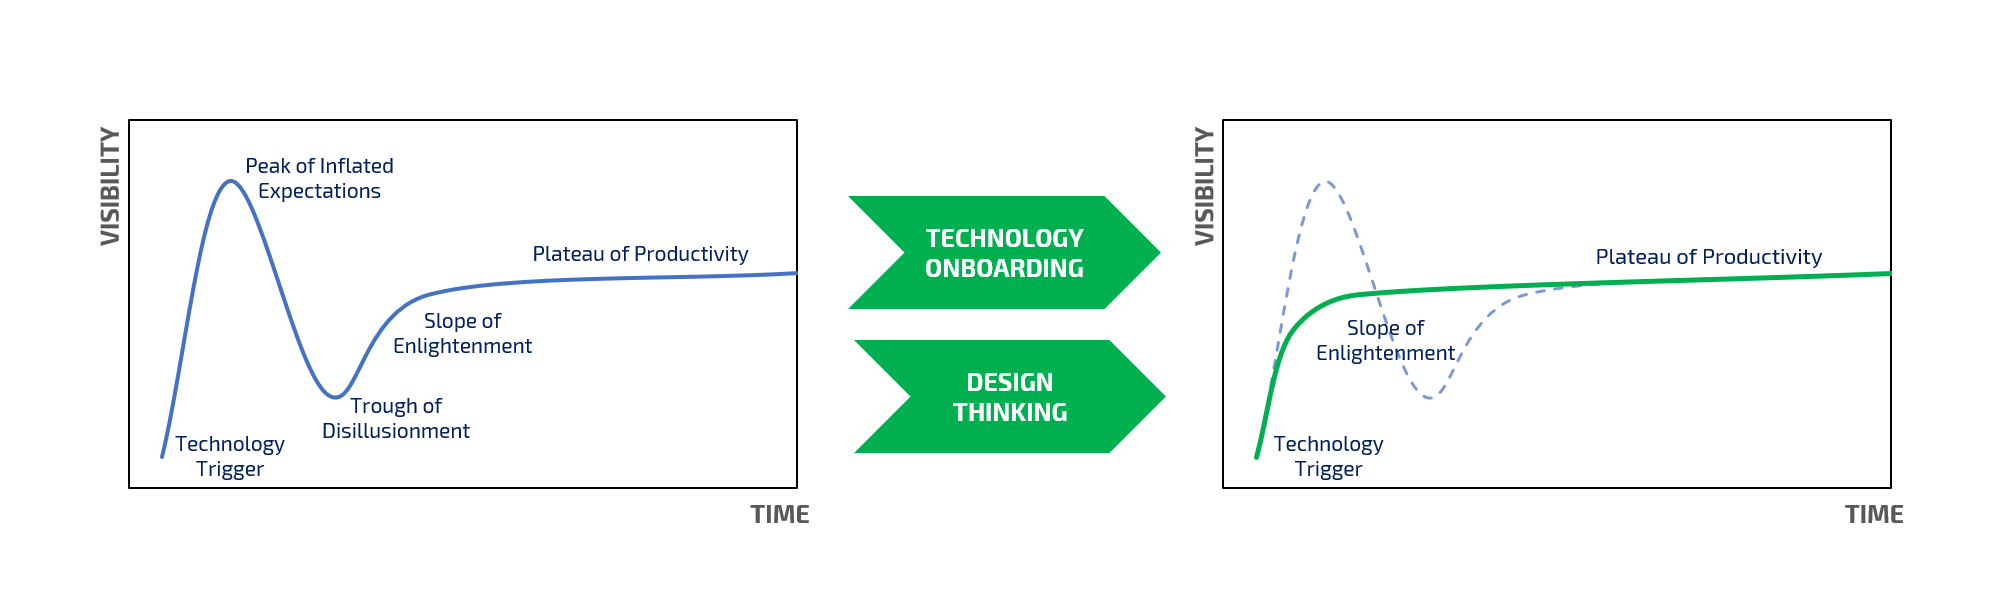 Technology Onboarding allows to flatten the hype curve, accelerating technology adoption and speeding up testing.